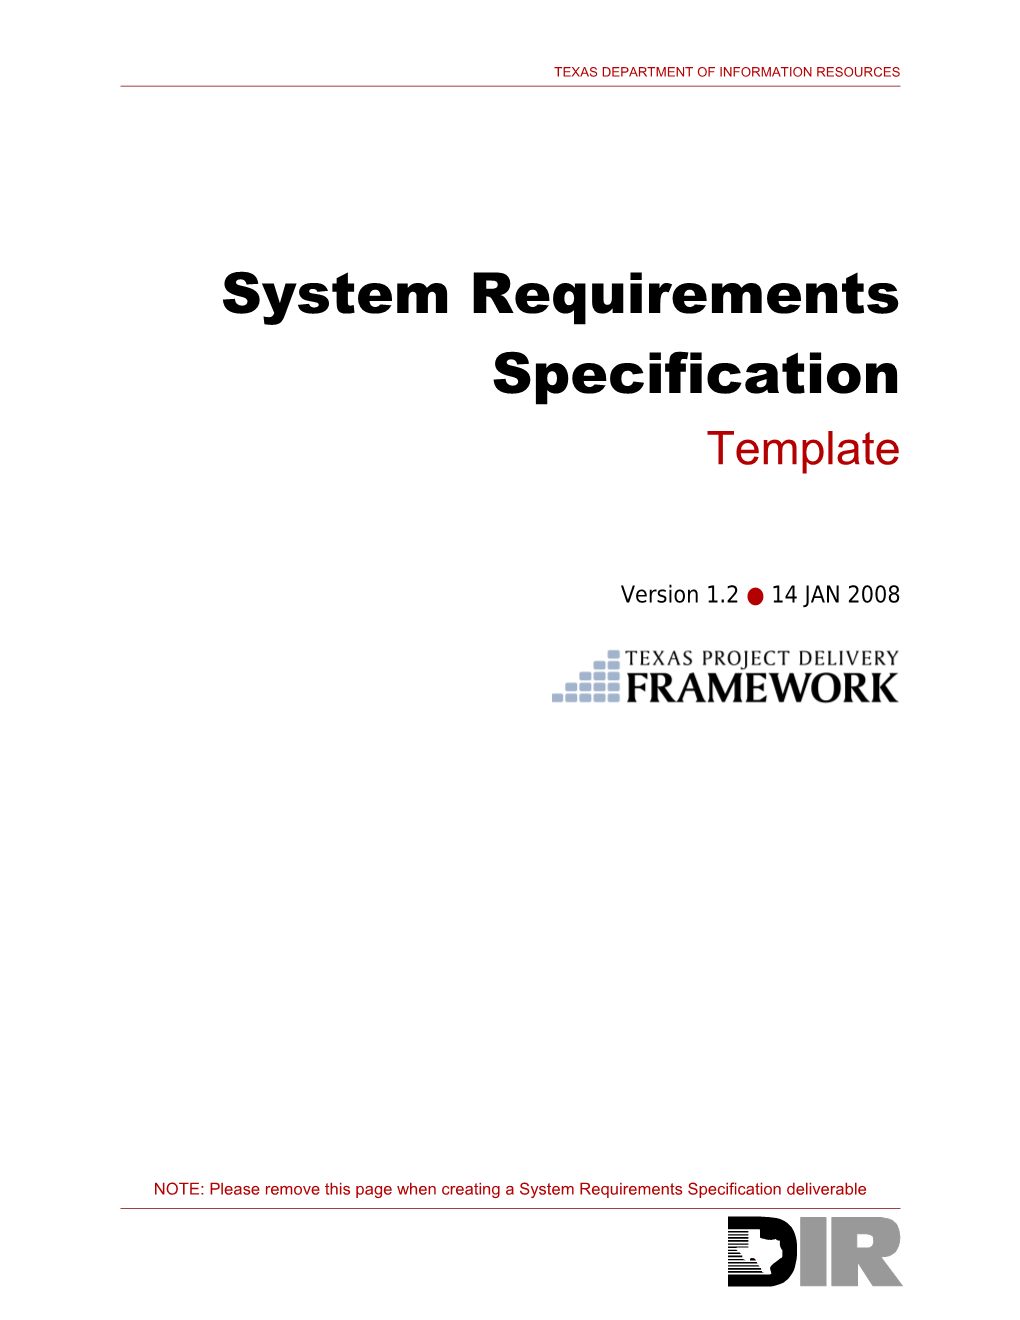 System Requirements Specifications Template